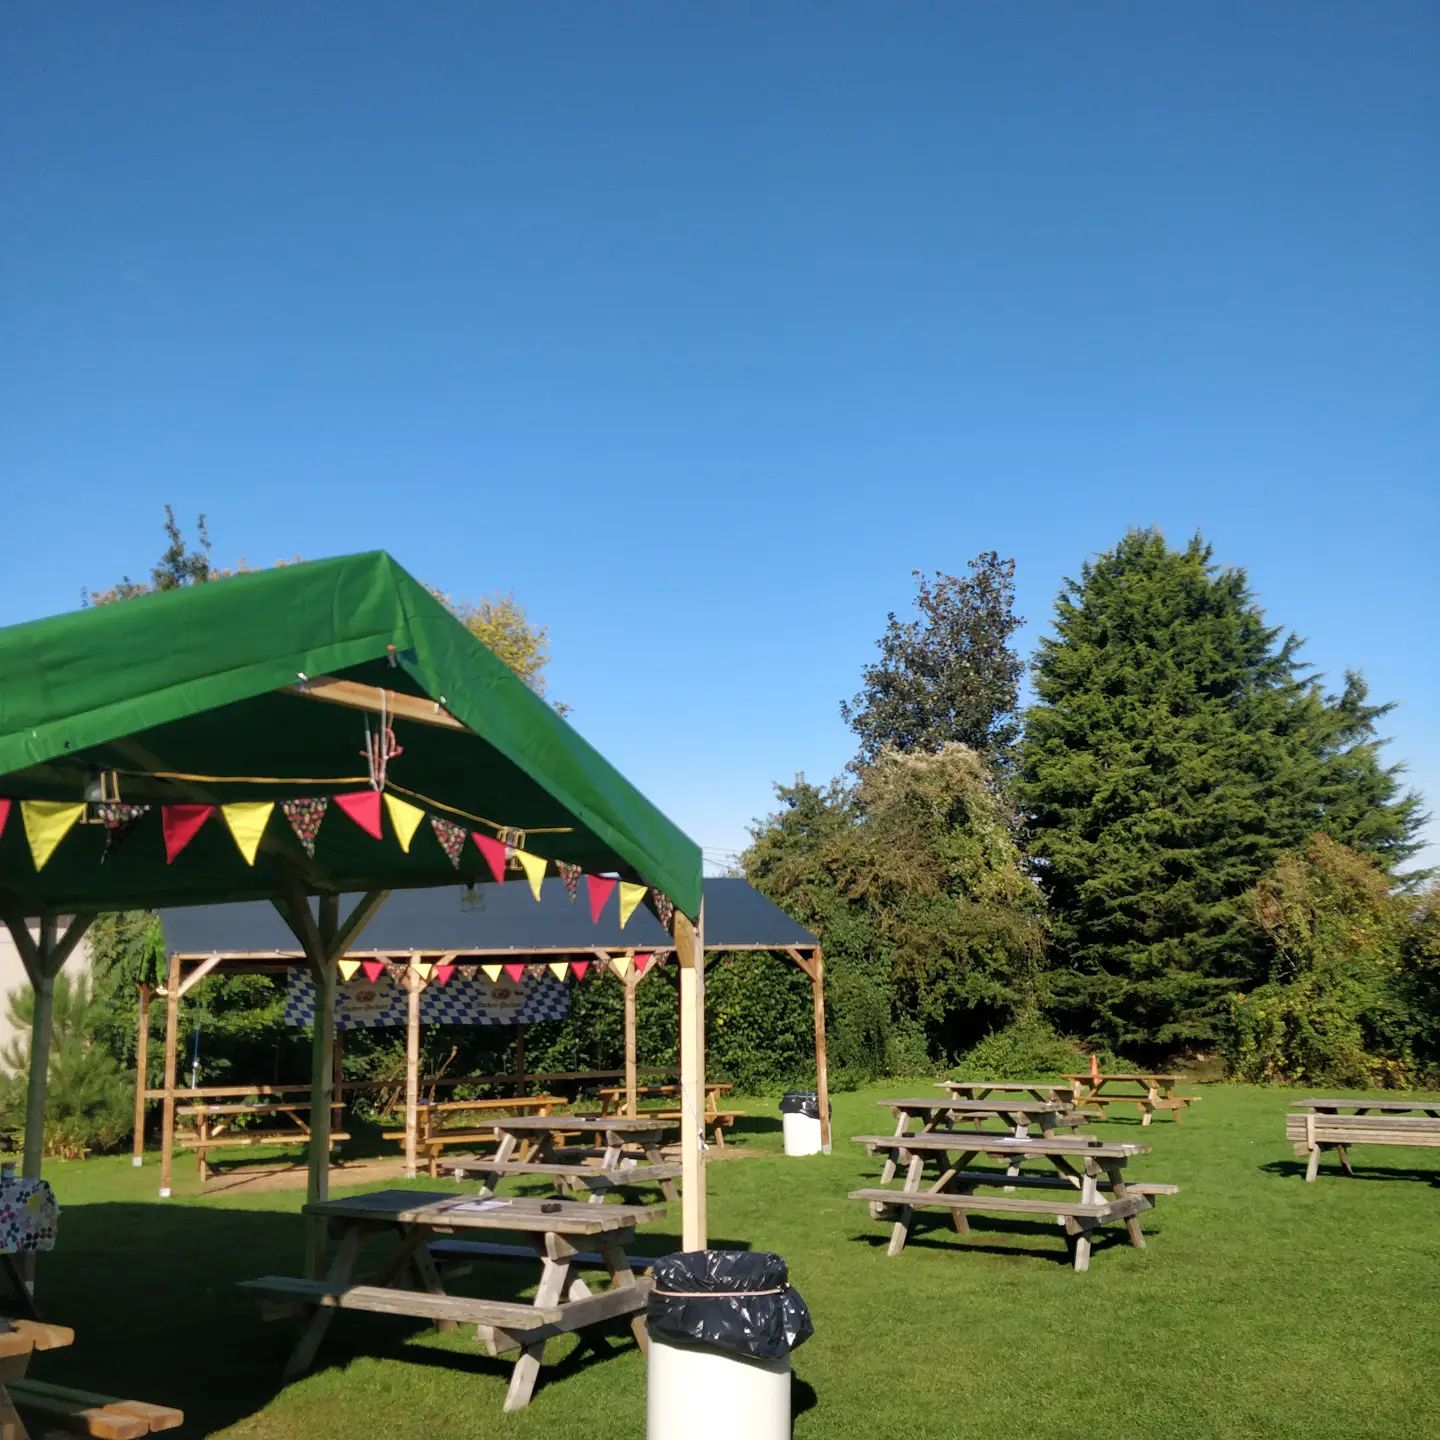 Our decorated marquees, during the sunniest October weekend we can remember!